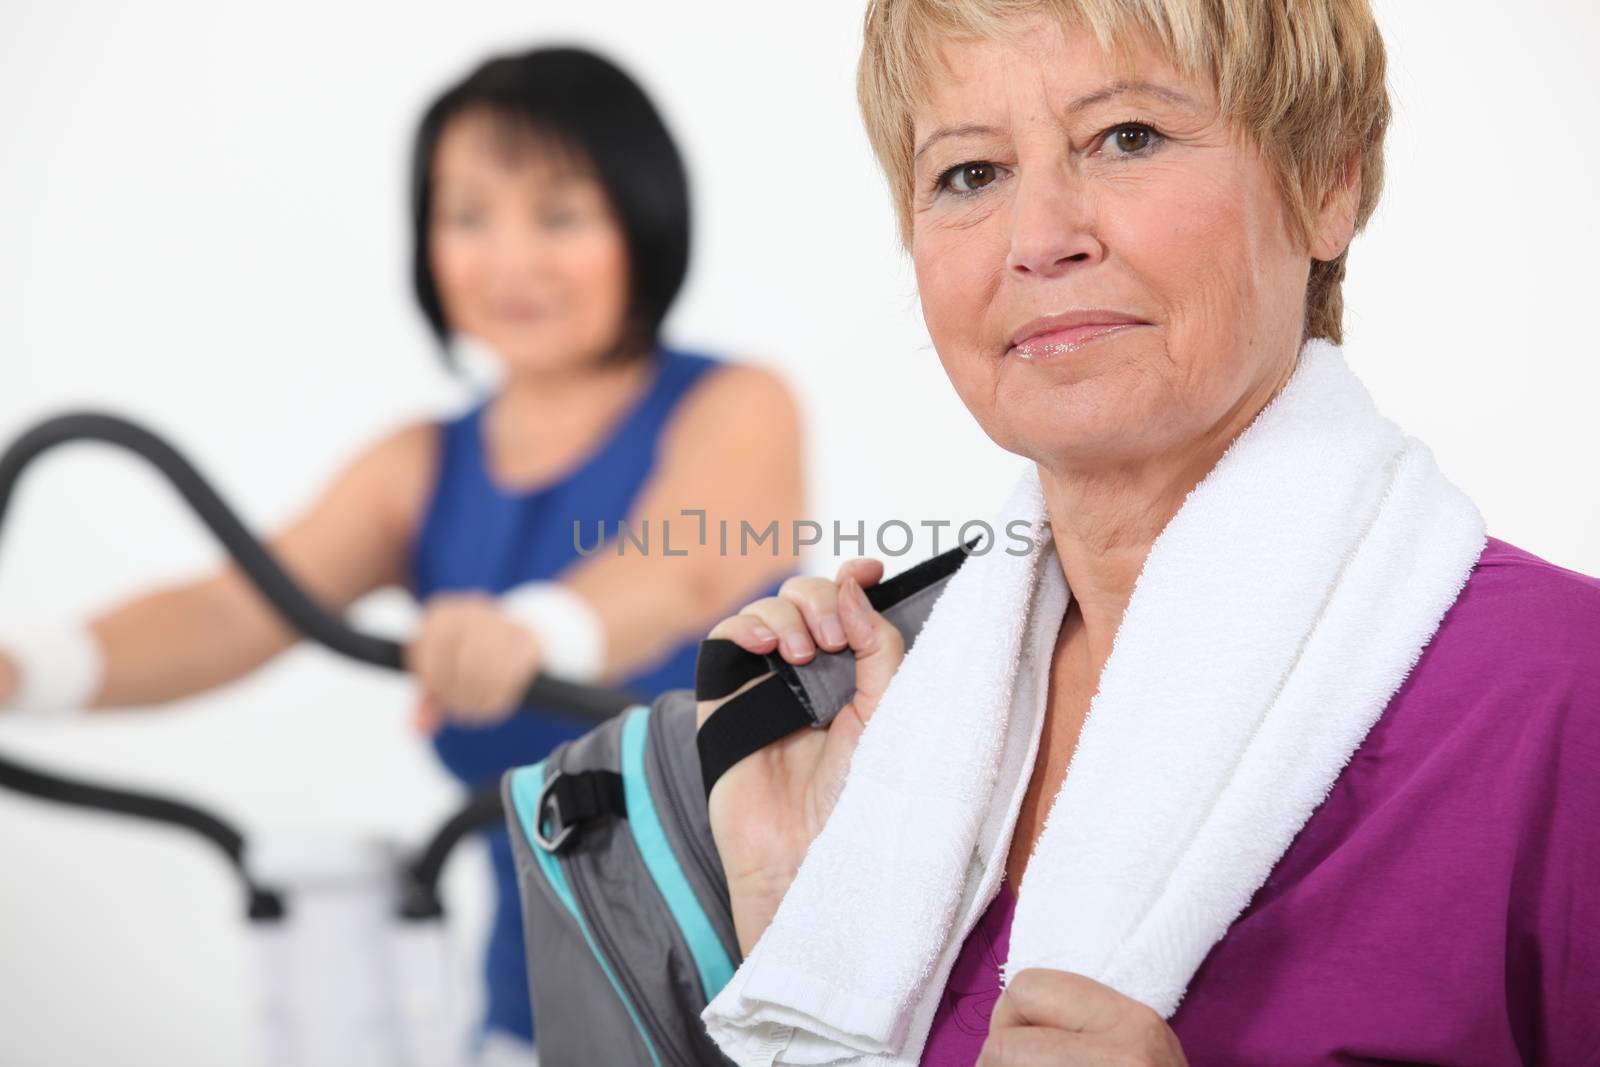 Women using gym equipment by phovoir